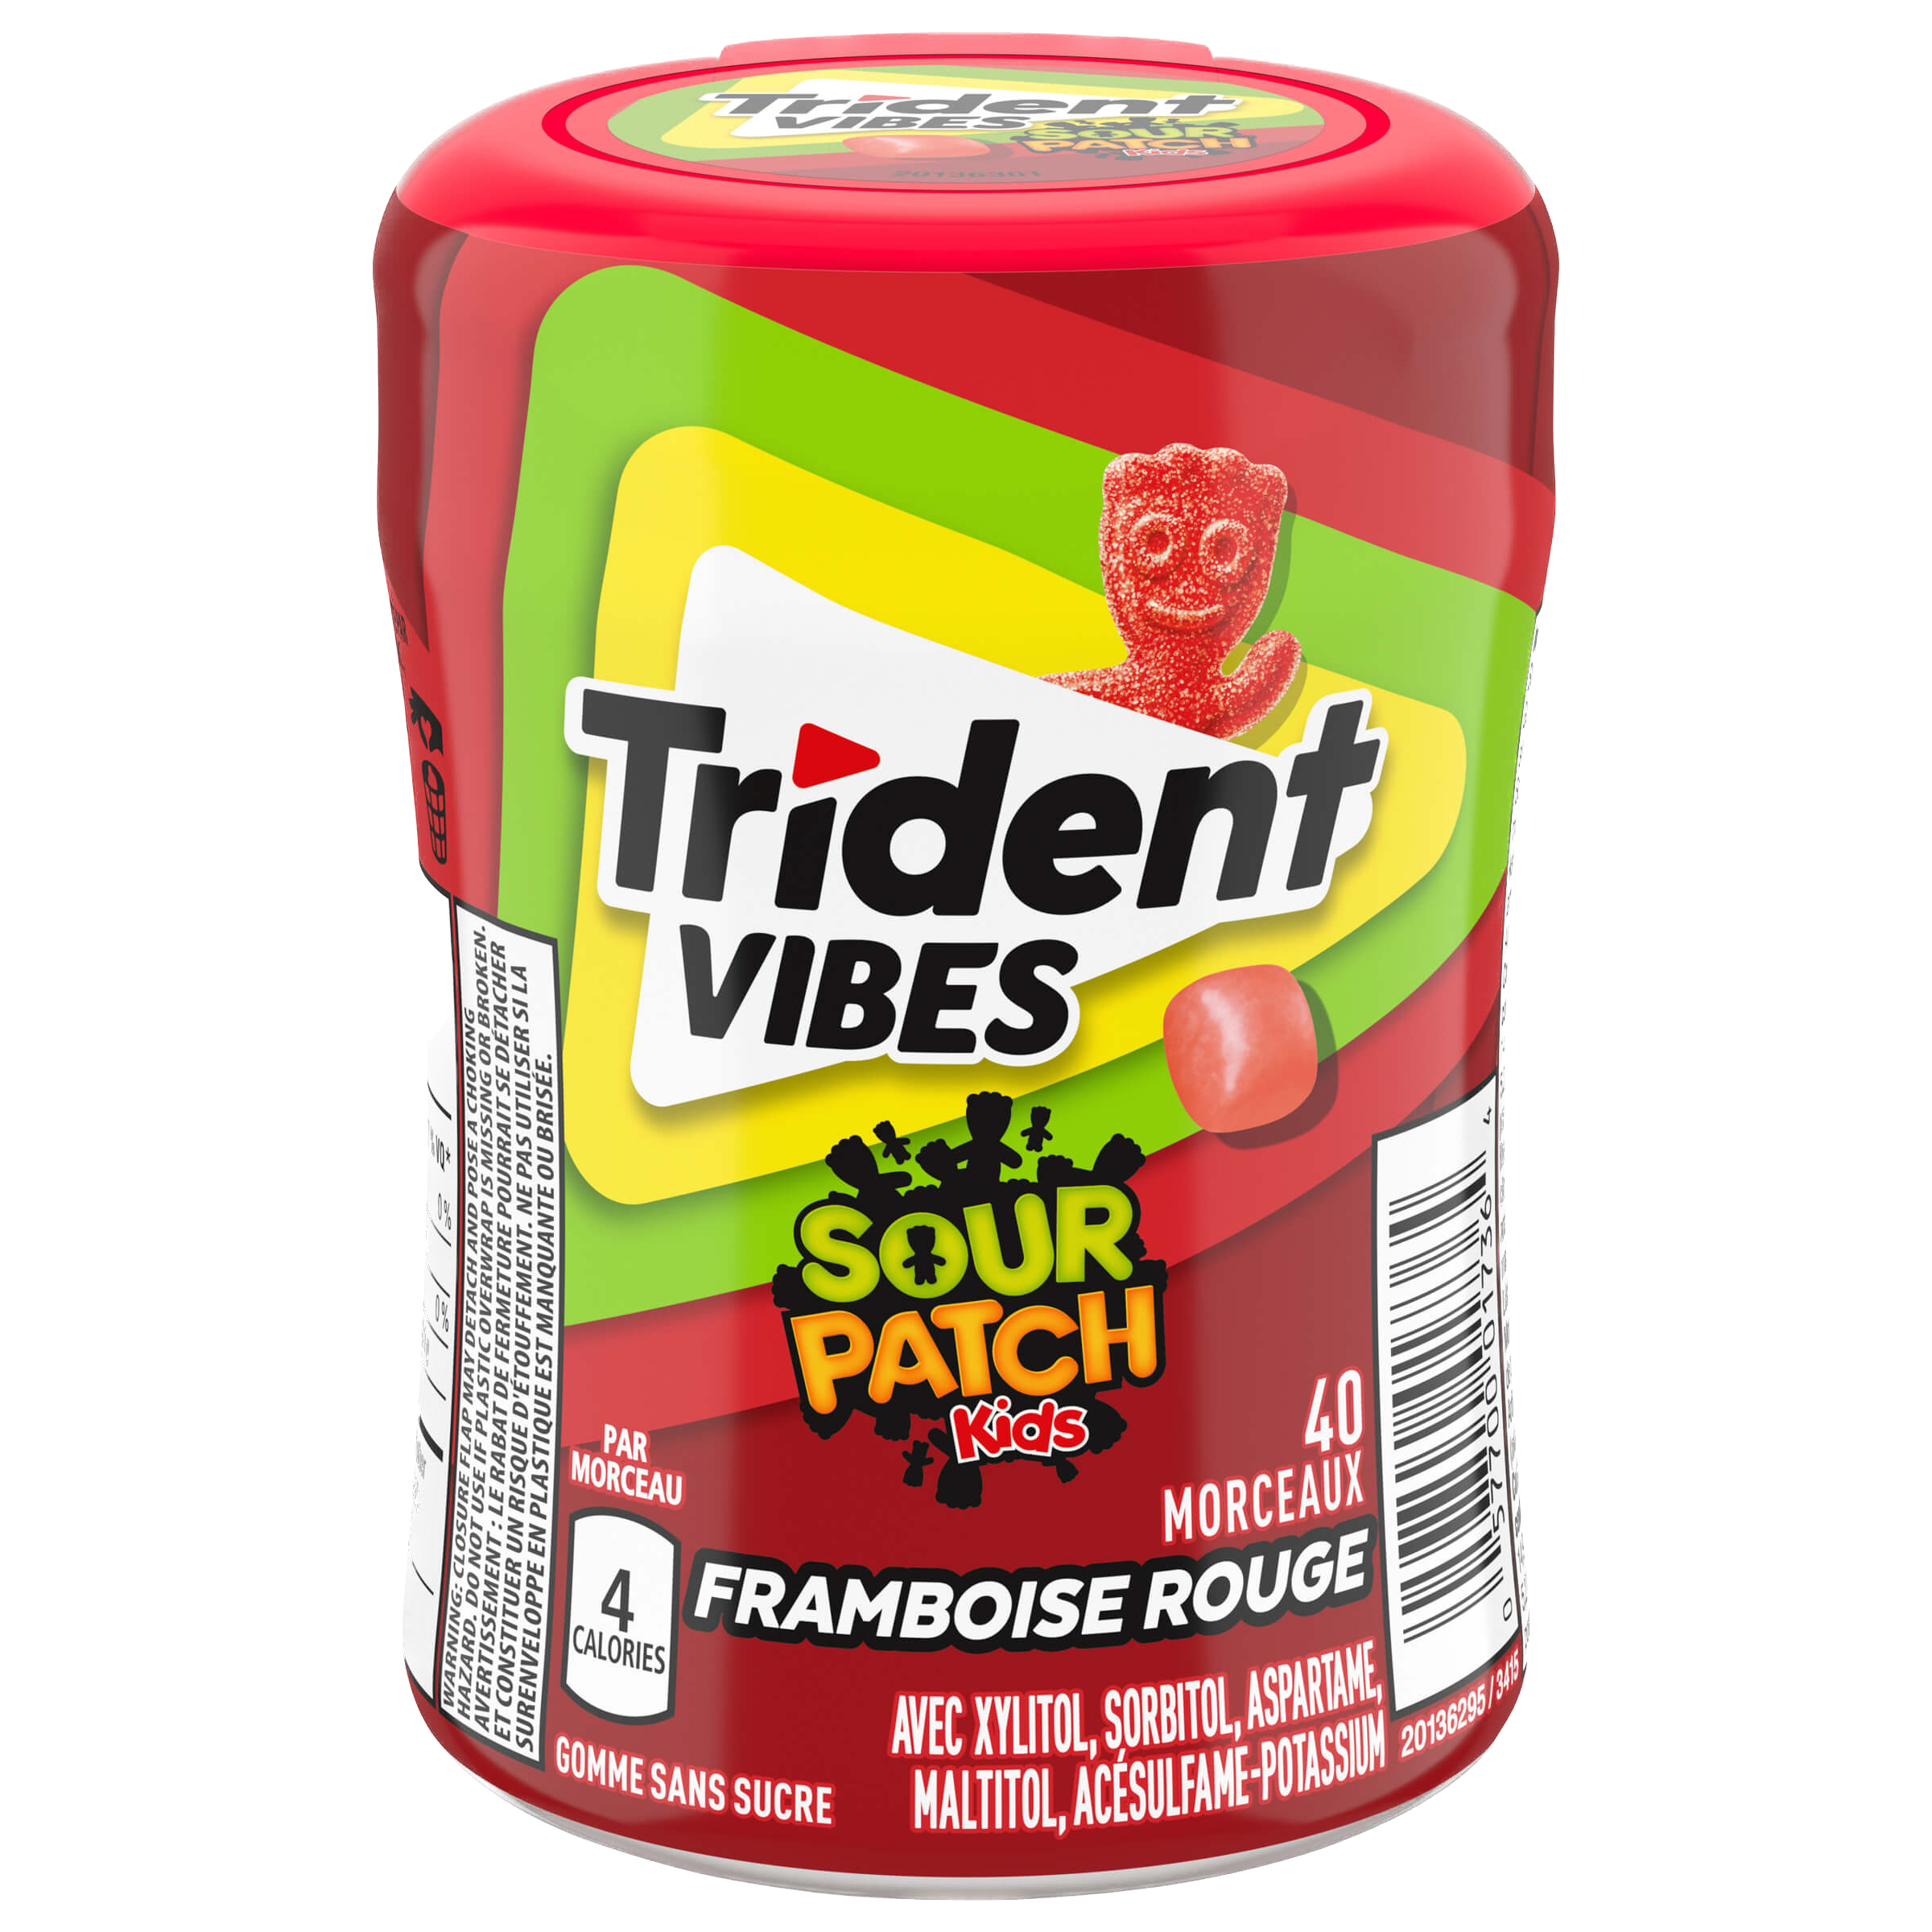 Trident Vibes SPK Red Berry